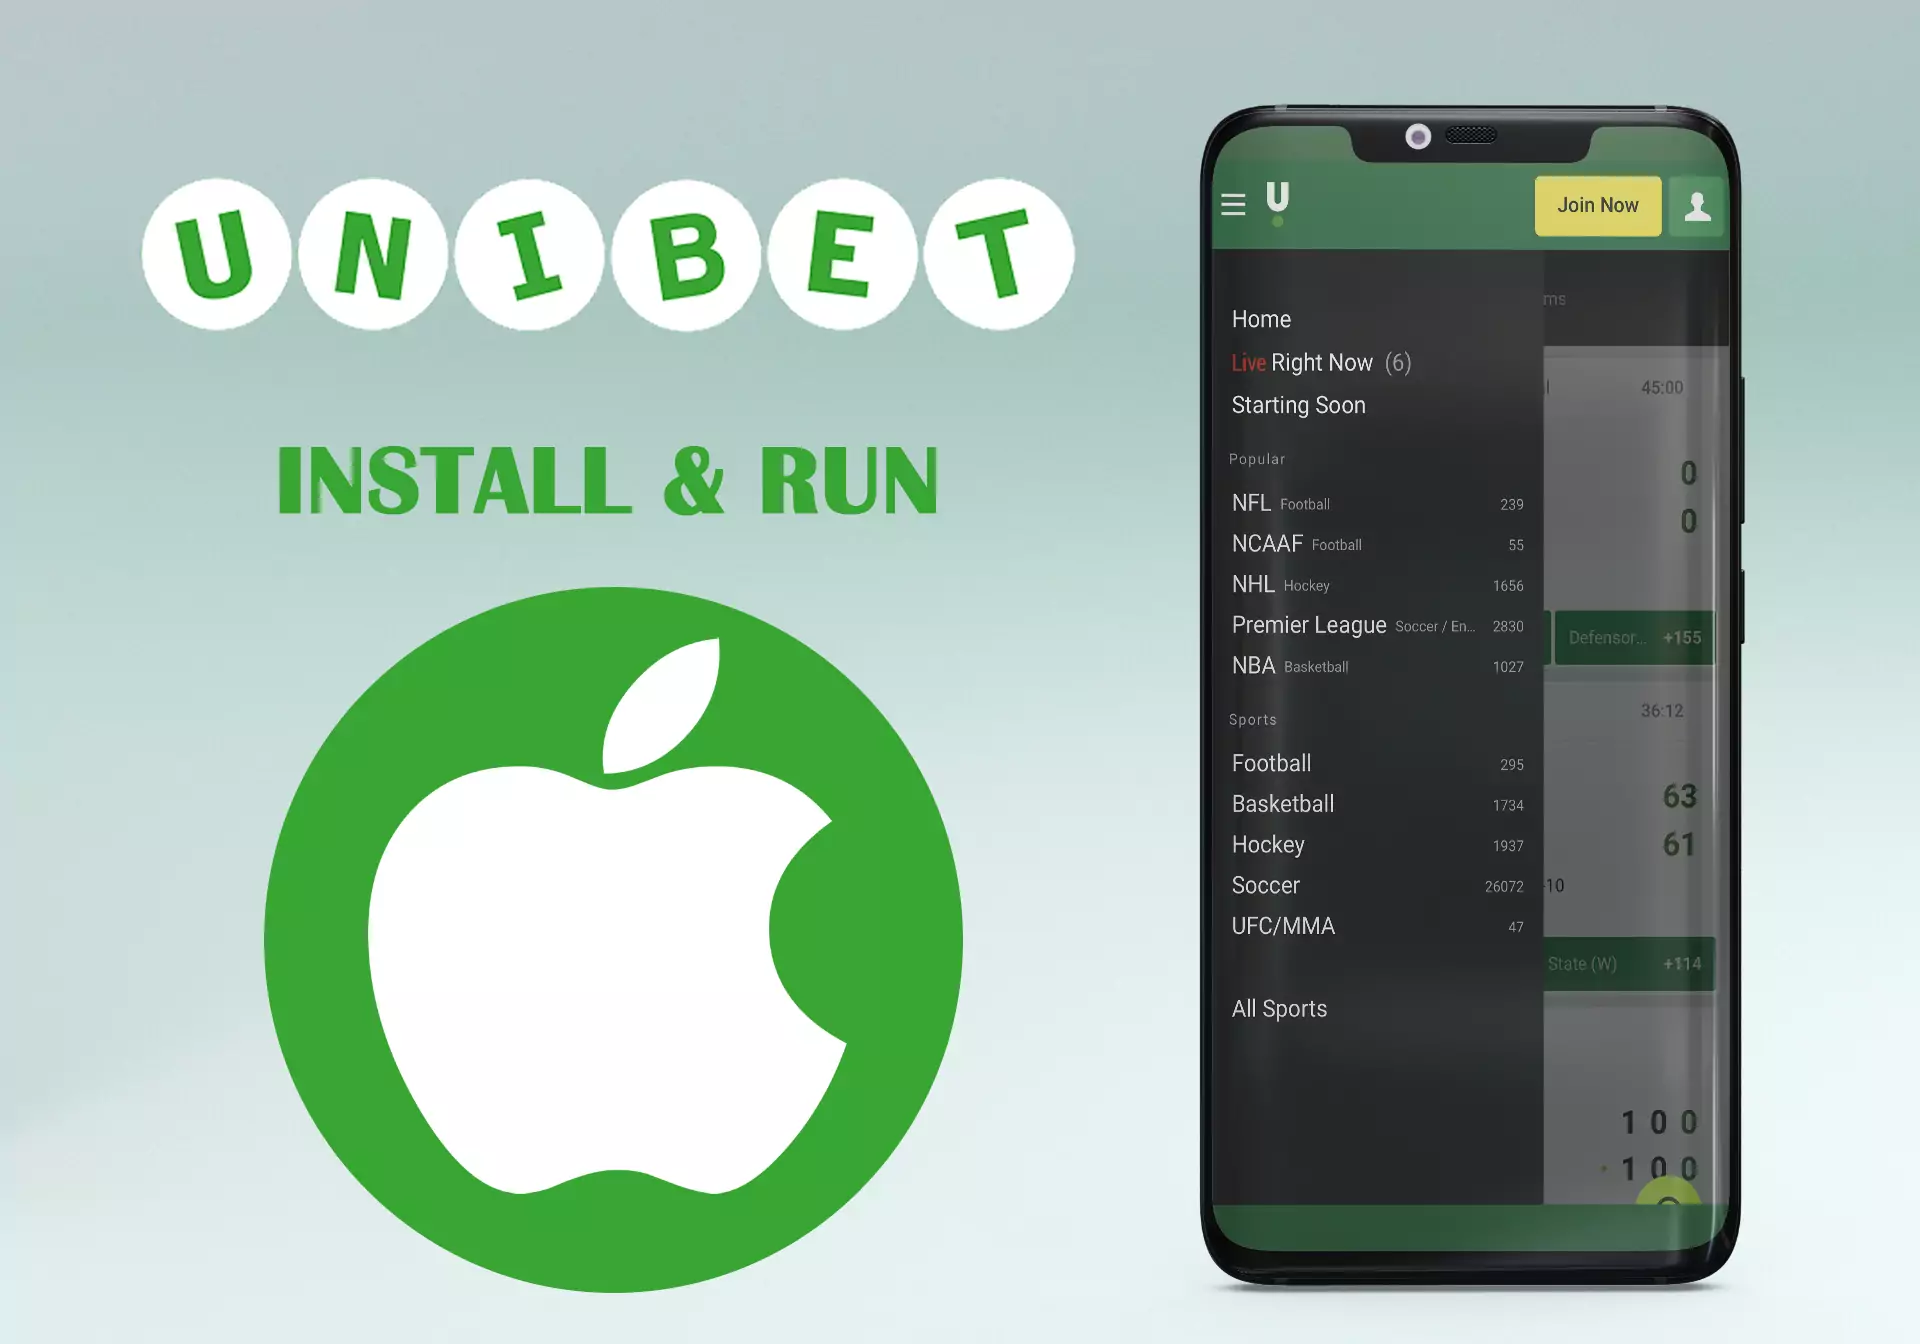 Install and run the Unibet app.